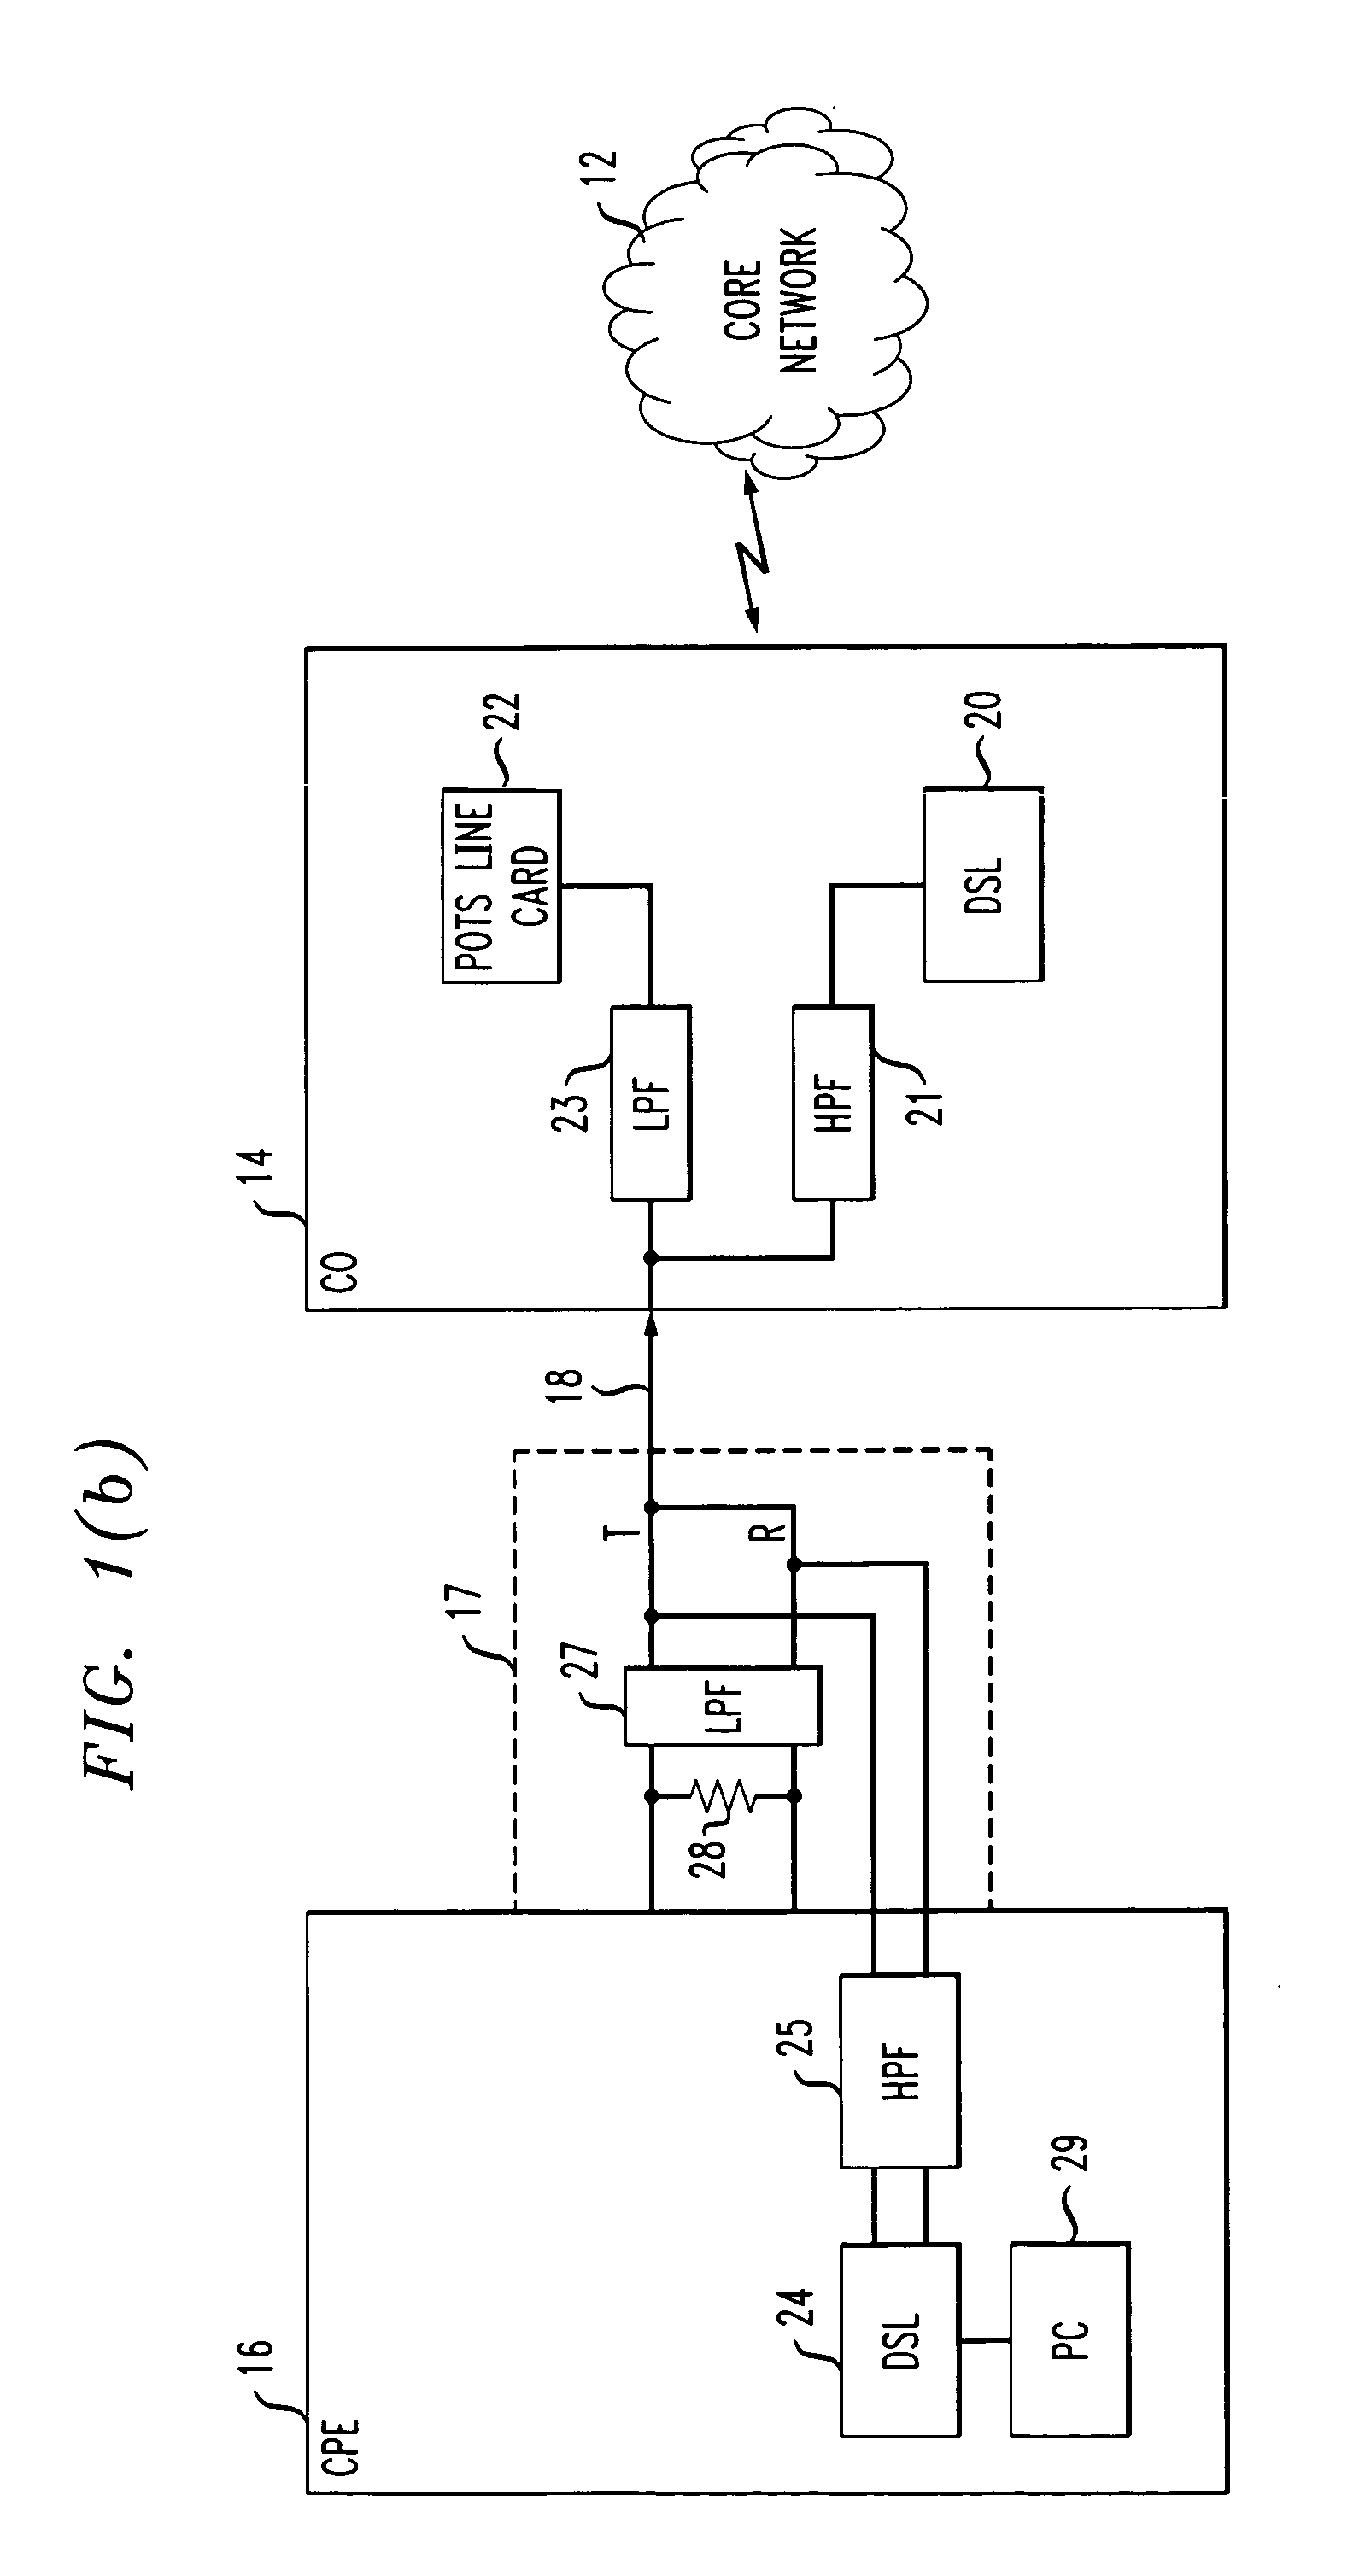 Method and apparatus for selectively terminating current in a digital subscriber line (DSL) modem